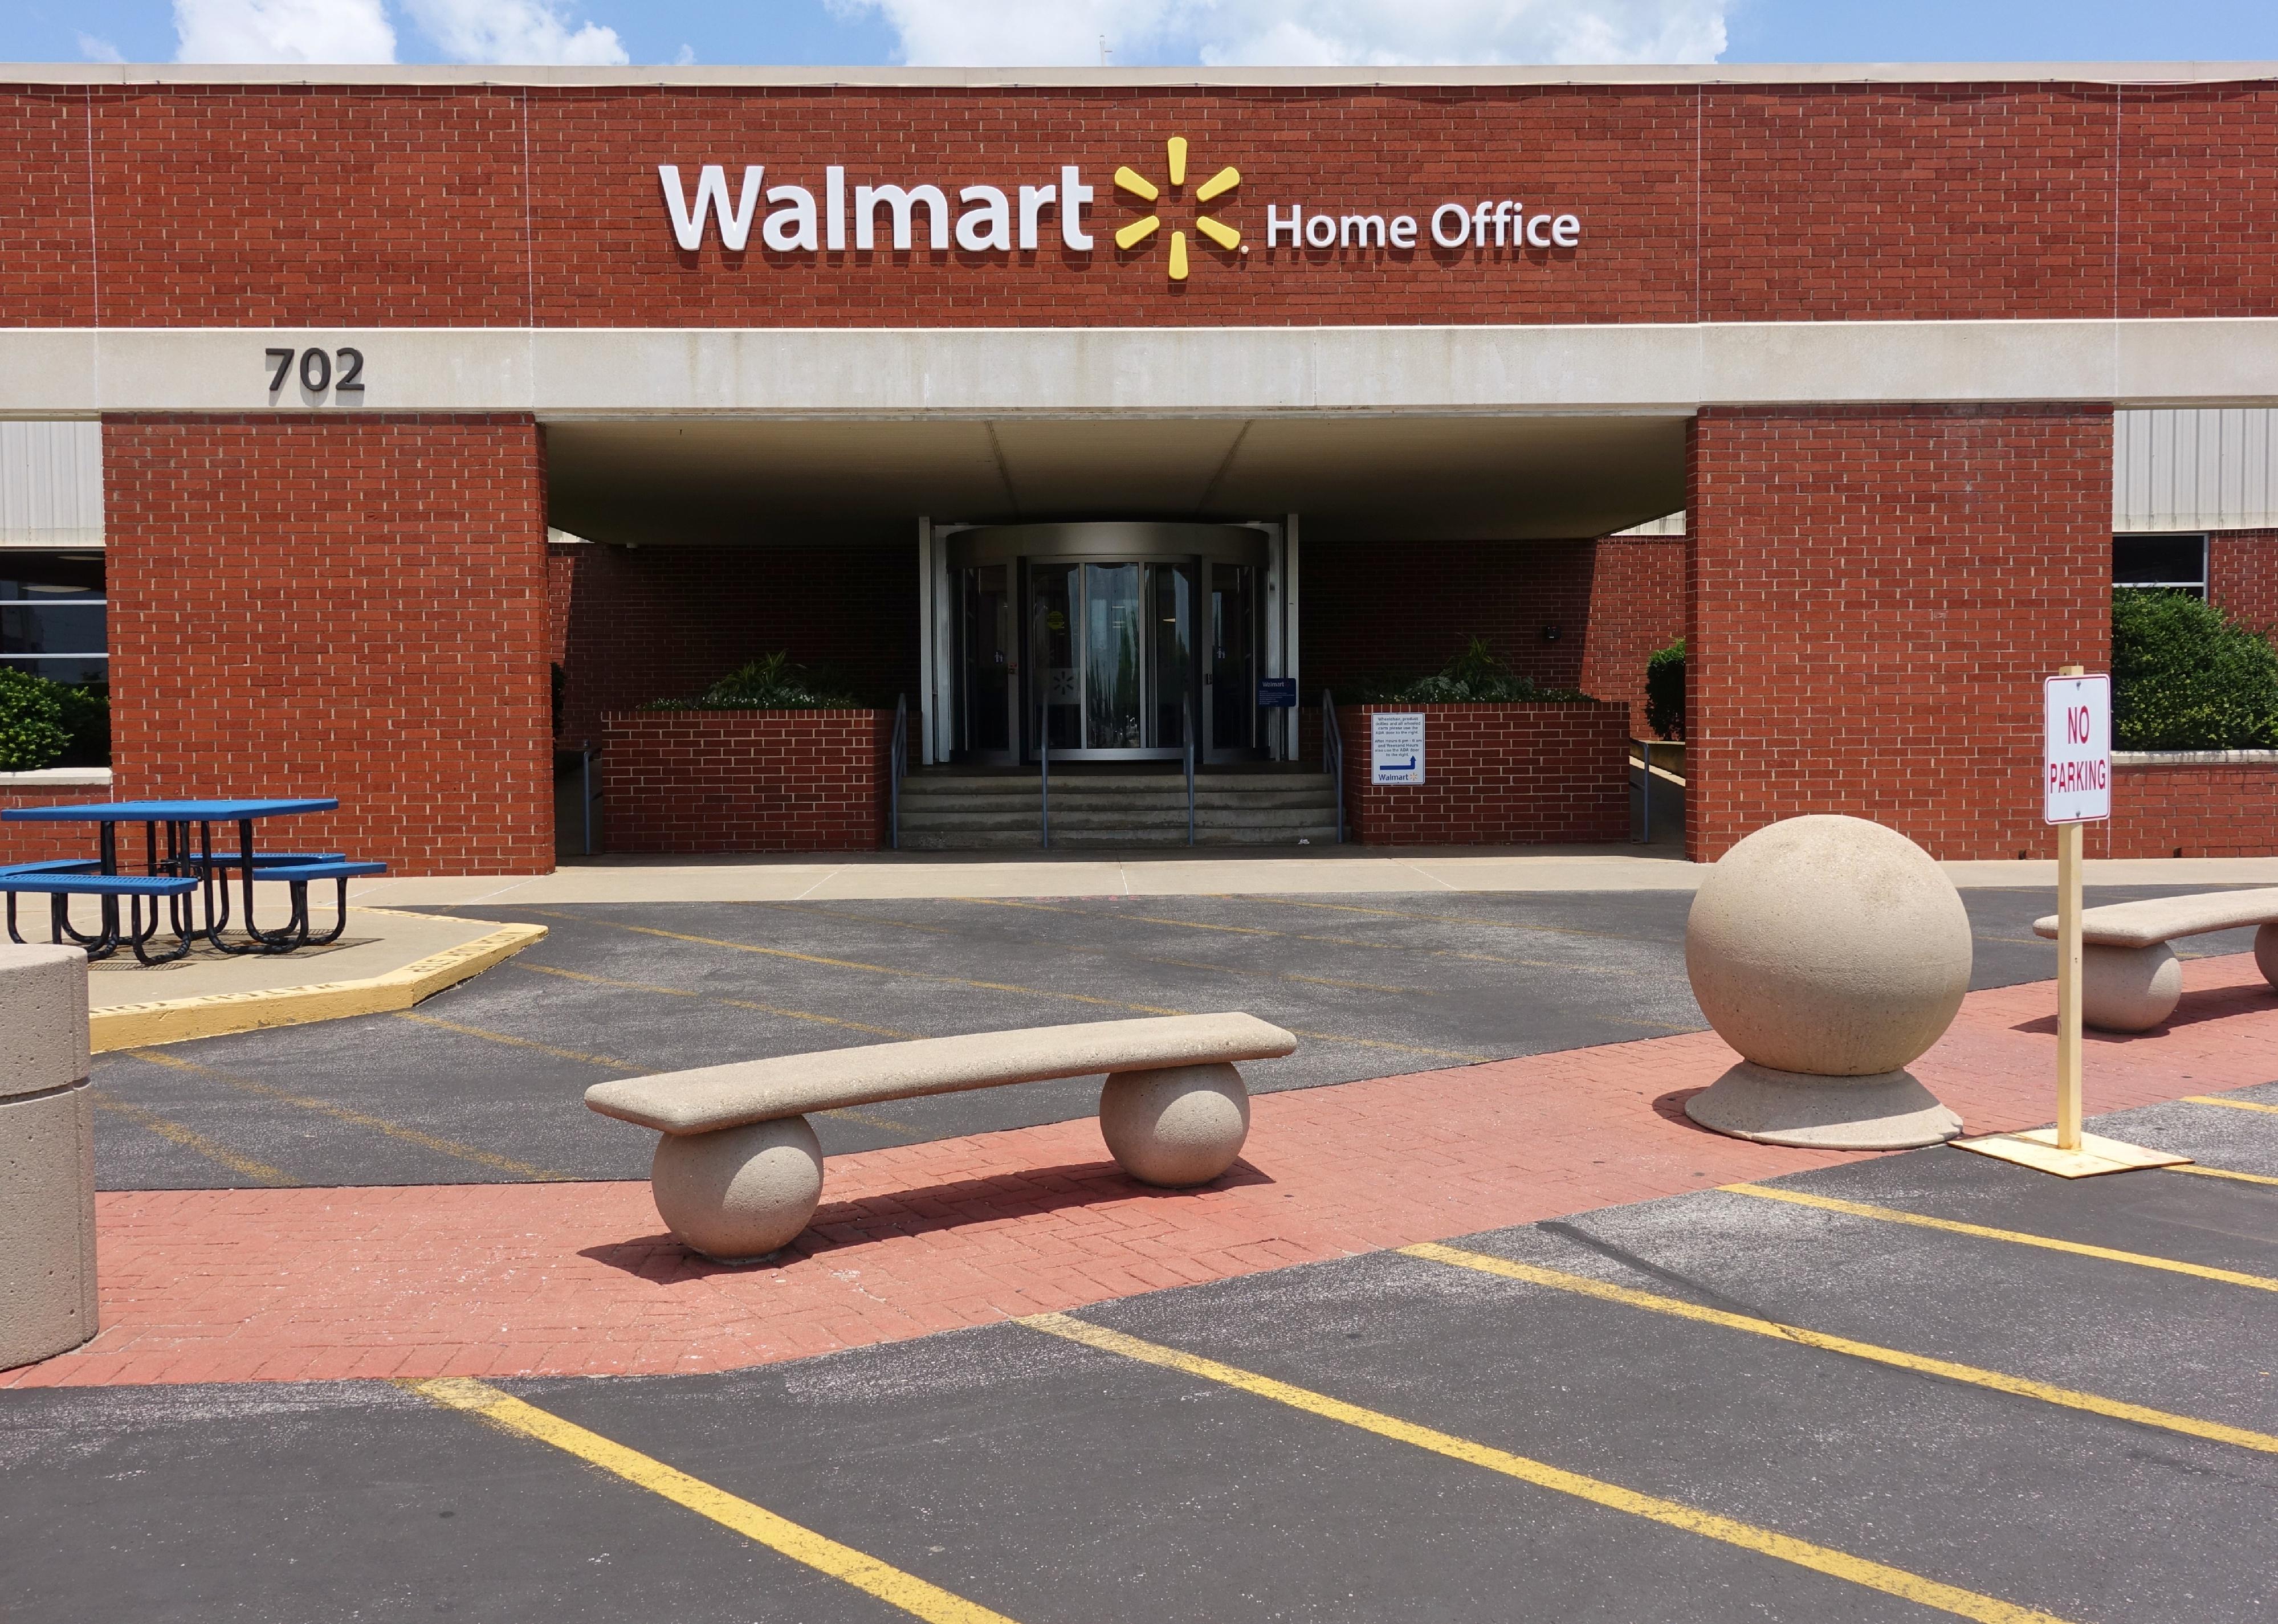 View of the Walmart Home Office corporate headquarters located in Bentonville, Arkansas.